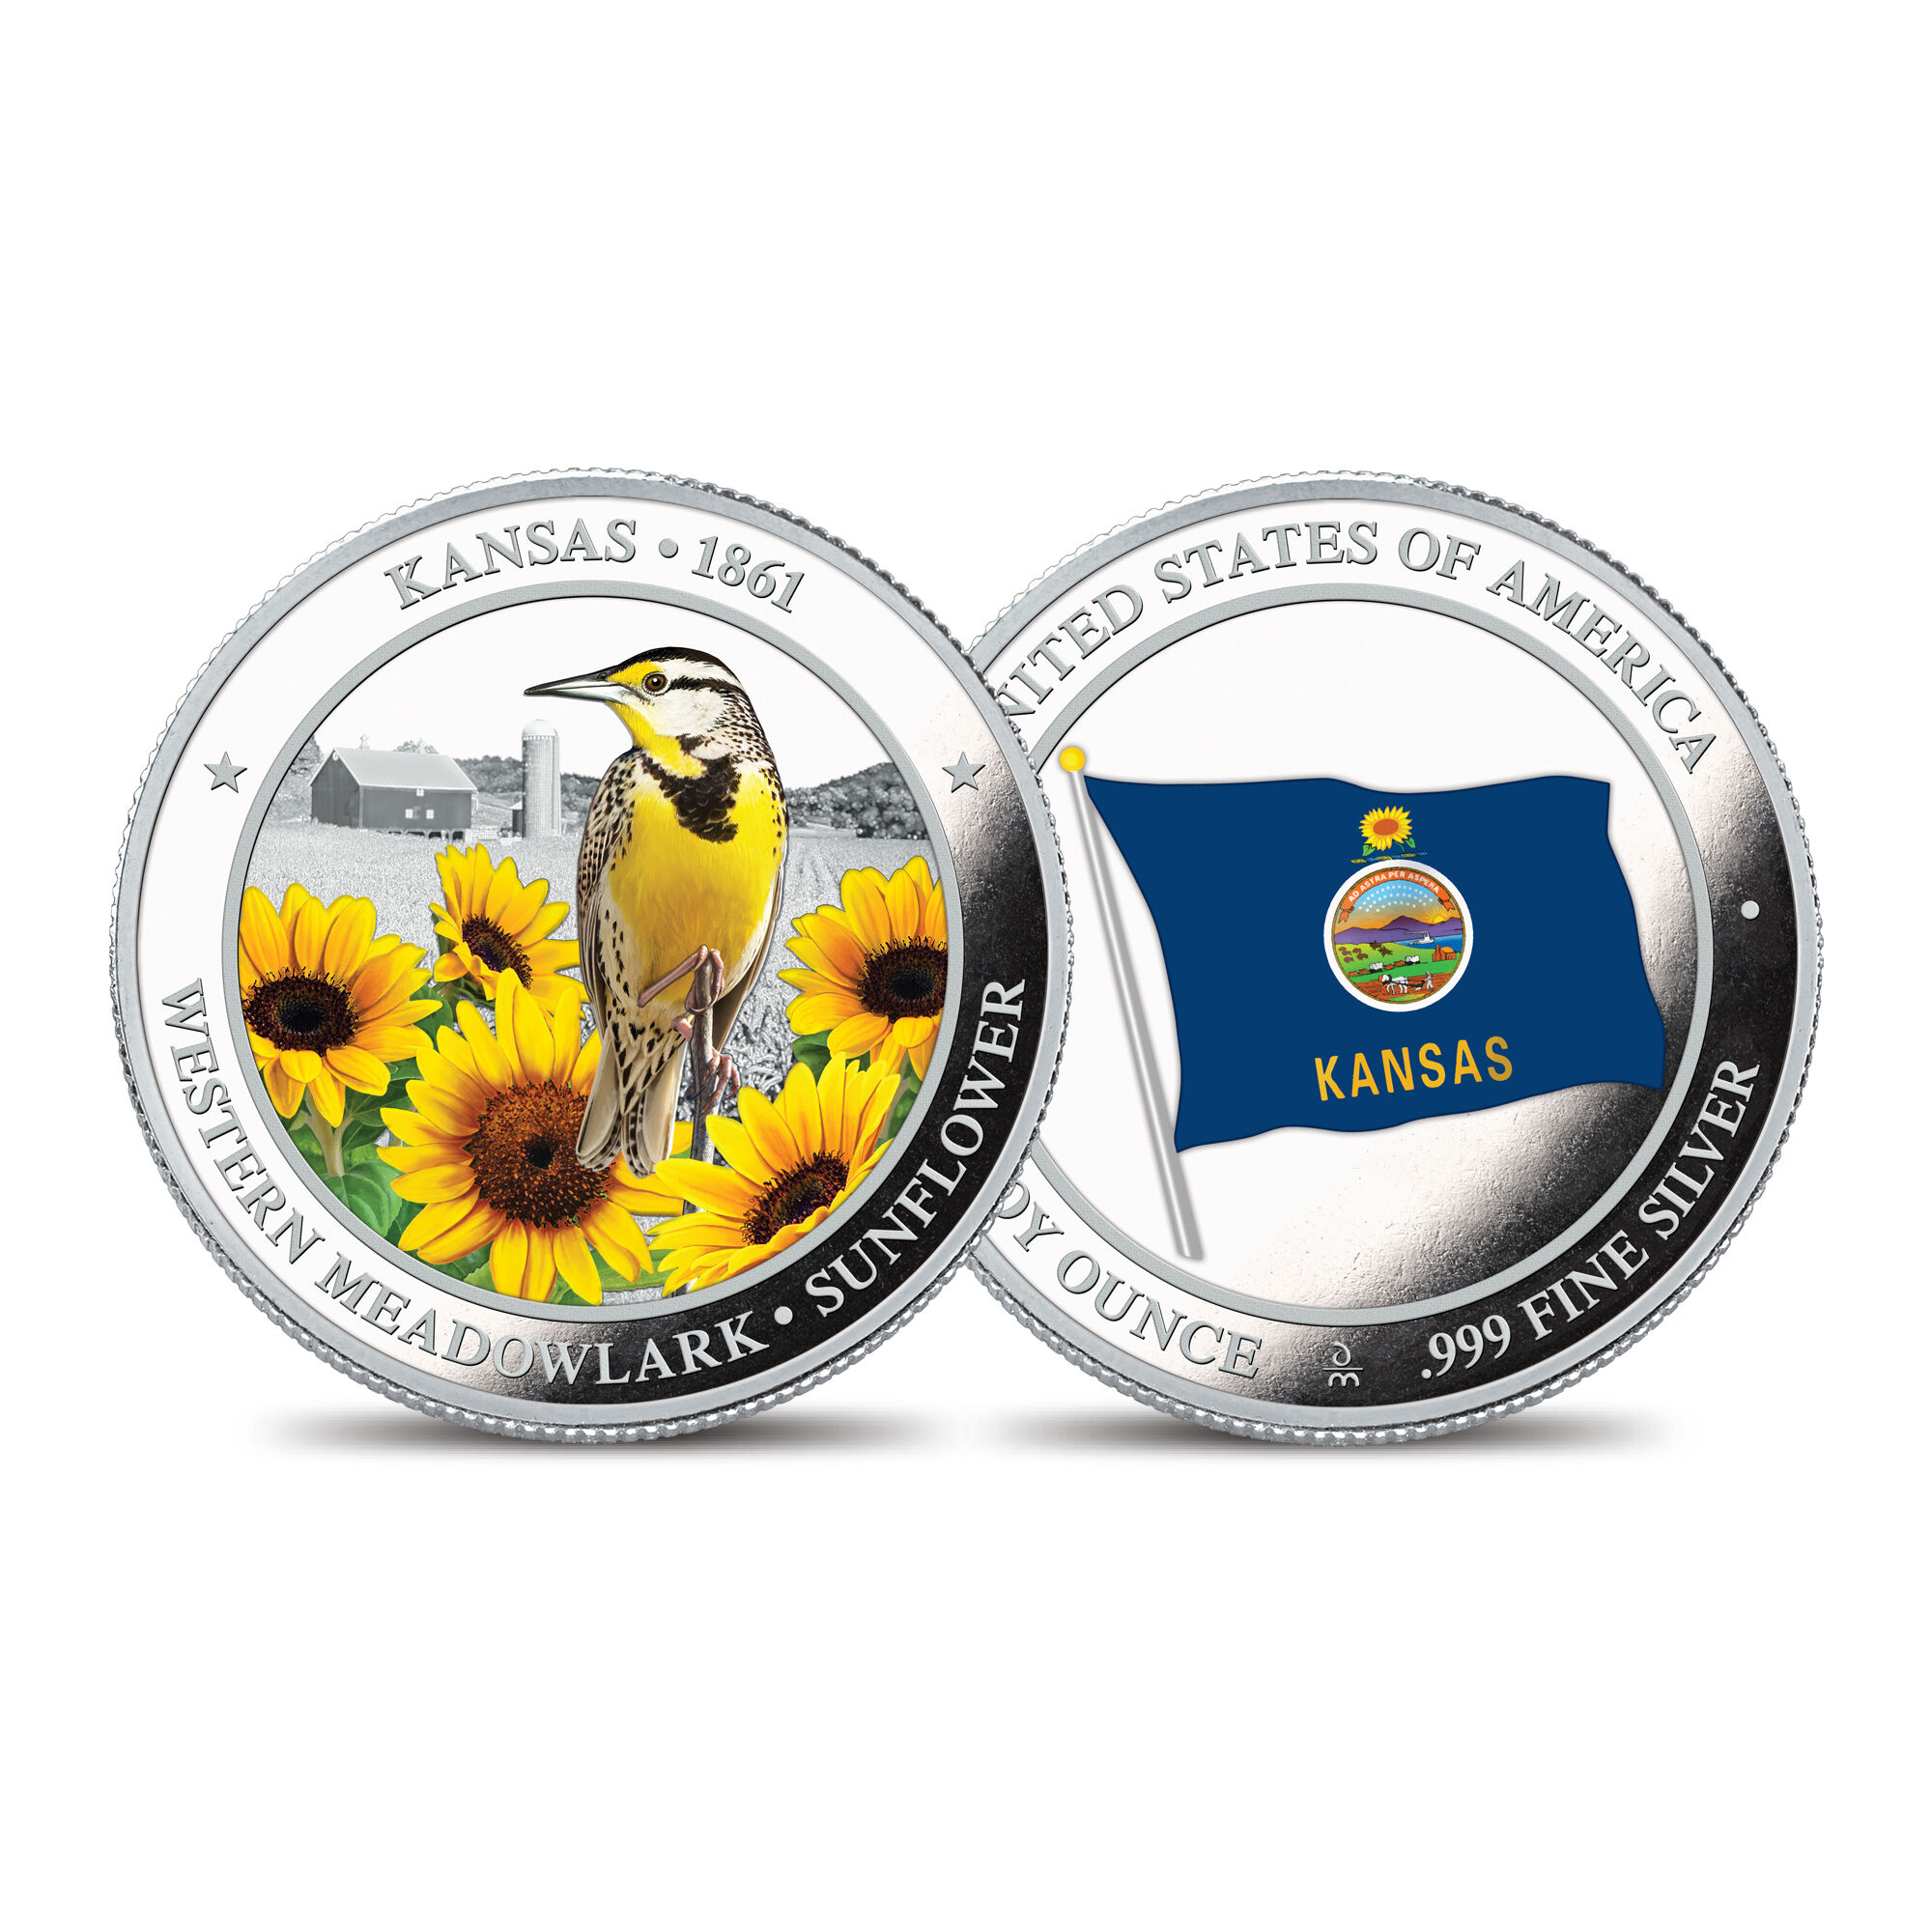 The State Bird and Flower Silver Commemoratives 2167 0088 a commemorativeKS